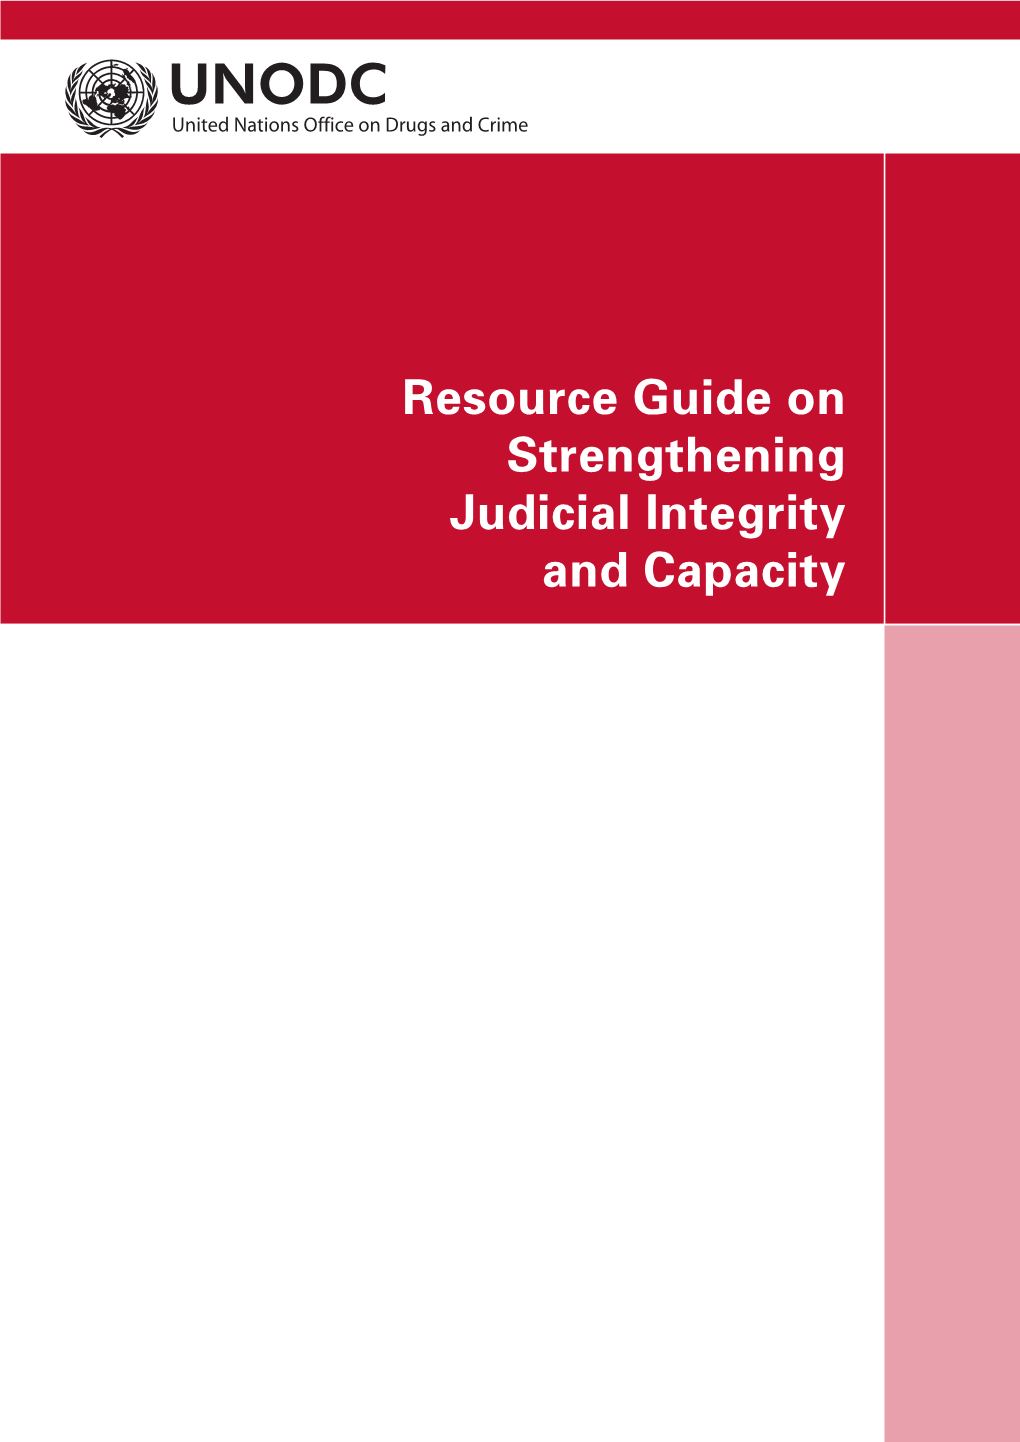 Resource Guide on Strengthening Judicial Integrity and Capacity